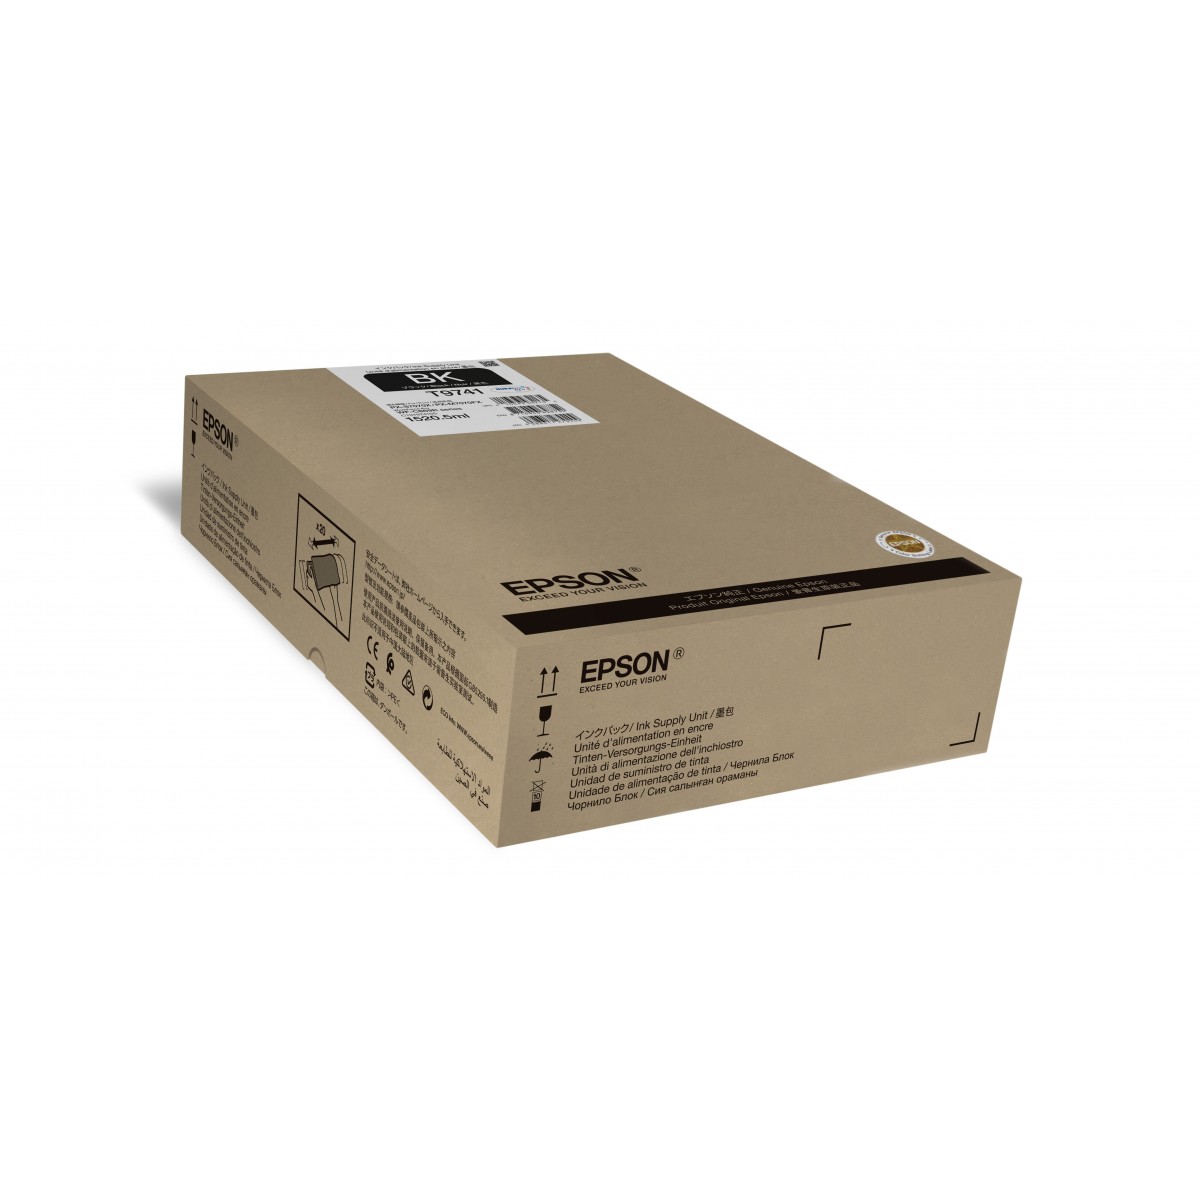 Epson lack XXL Ink Supply Unit - High (XL) Yield - Pigment-based ink - 1520.5 ml - 86000 pages - 1 pc(s)